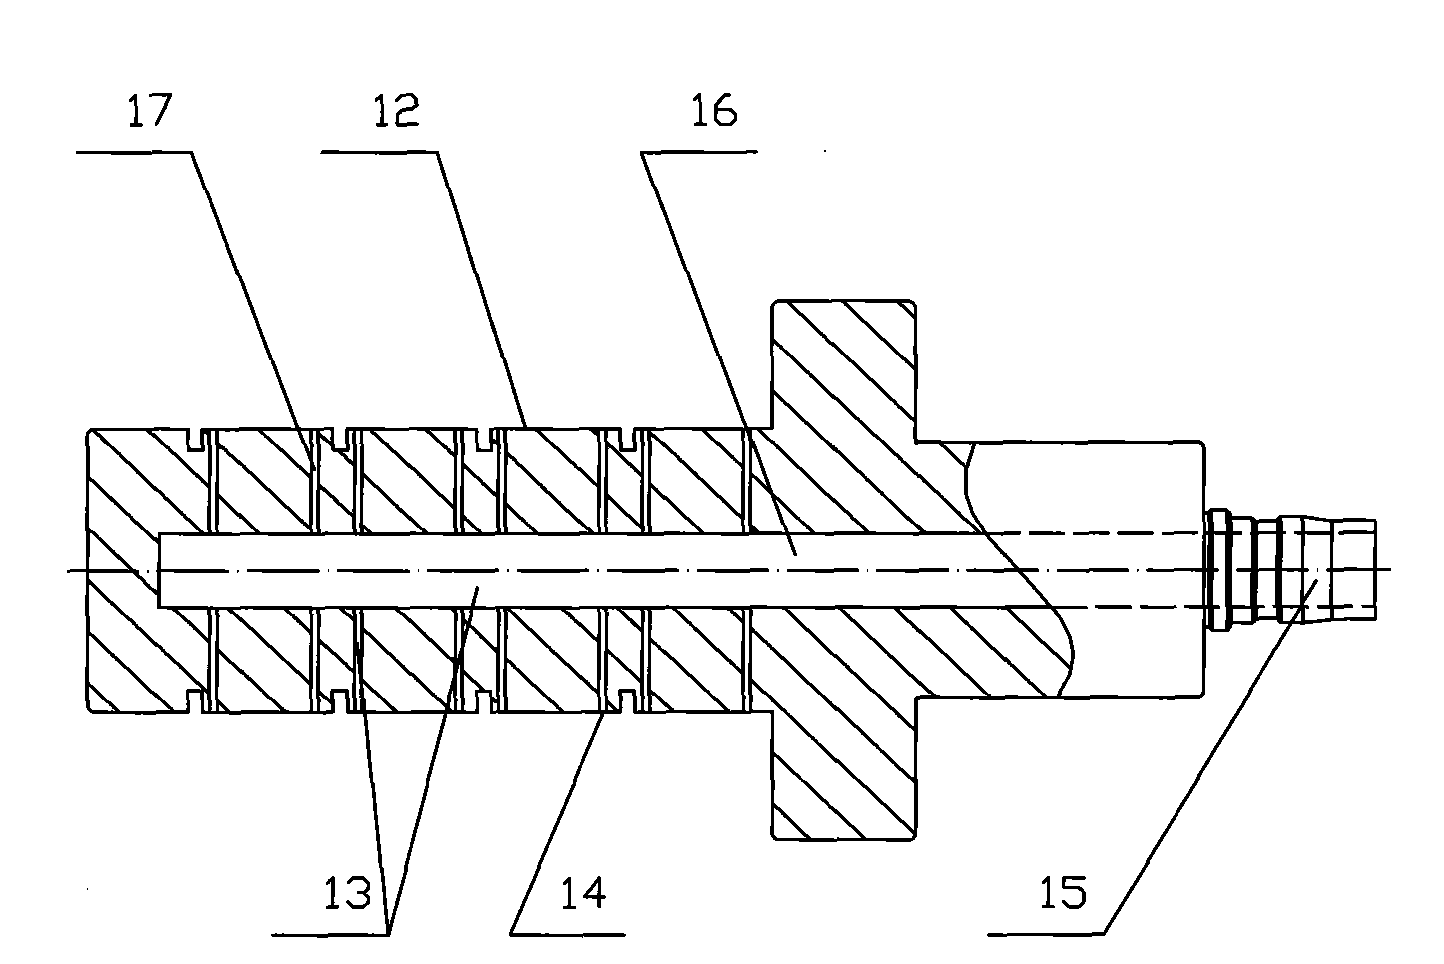 Method for processing automobile buffer block and special clamp used by method